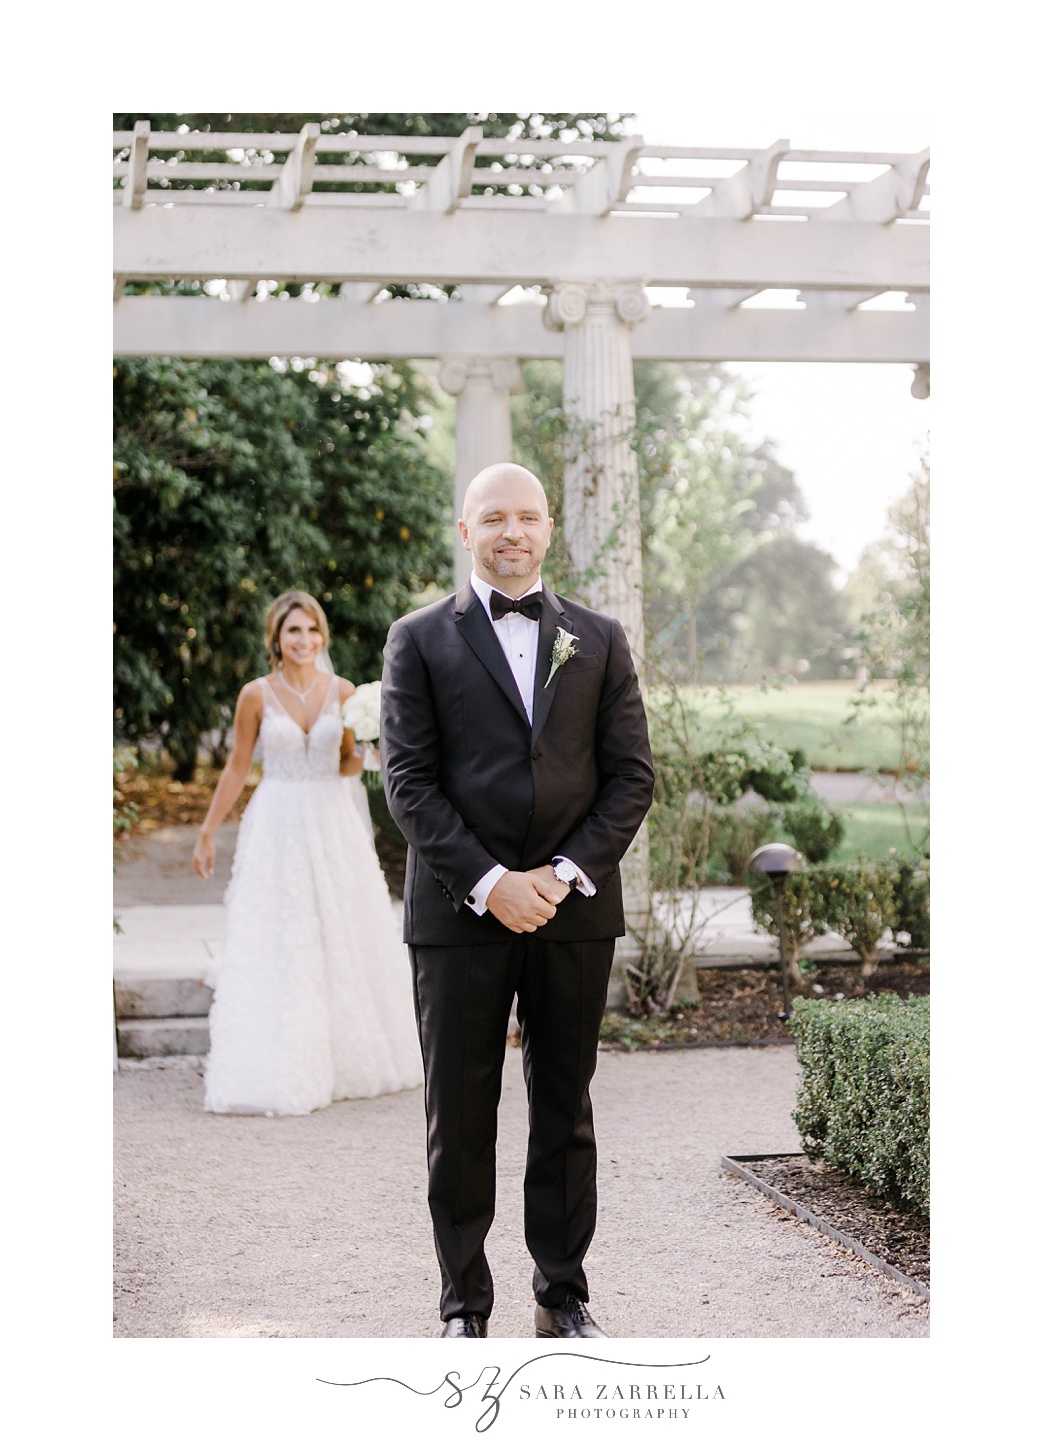 bride approaches groom for first look in Rosecliff Mansion garden